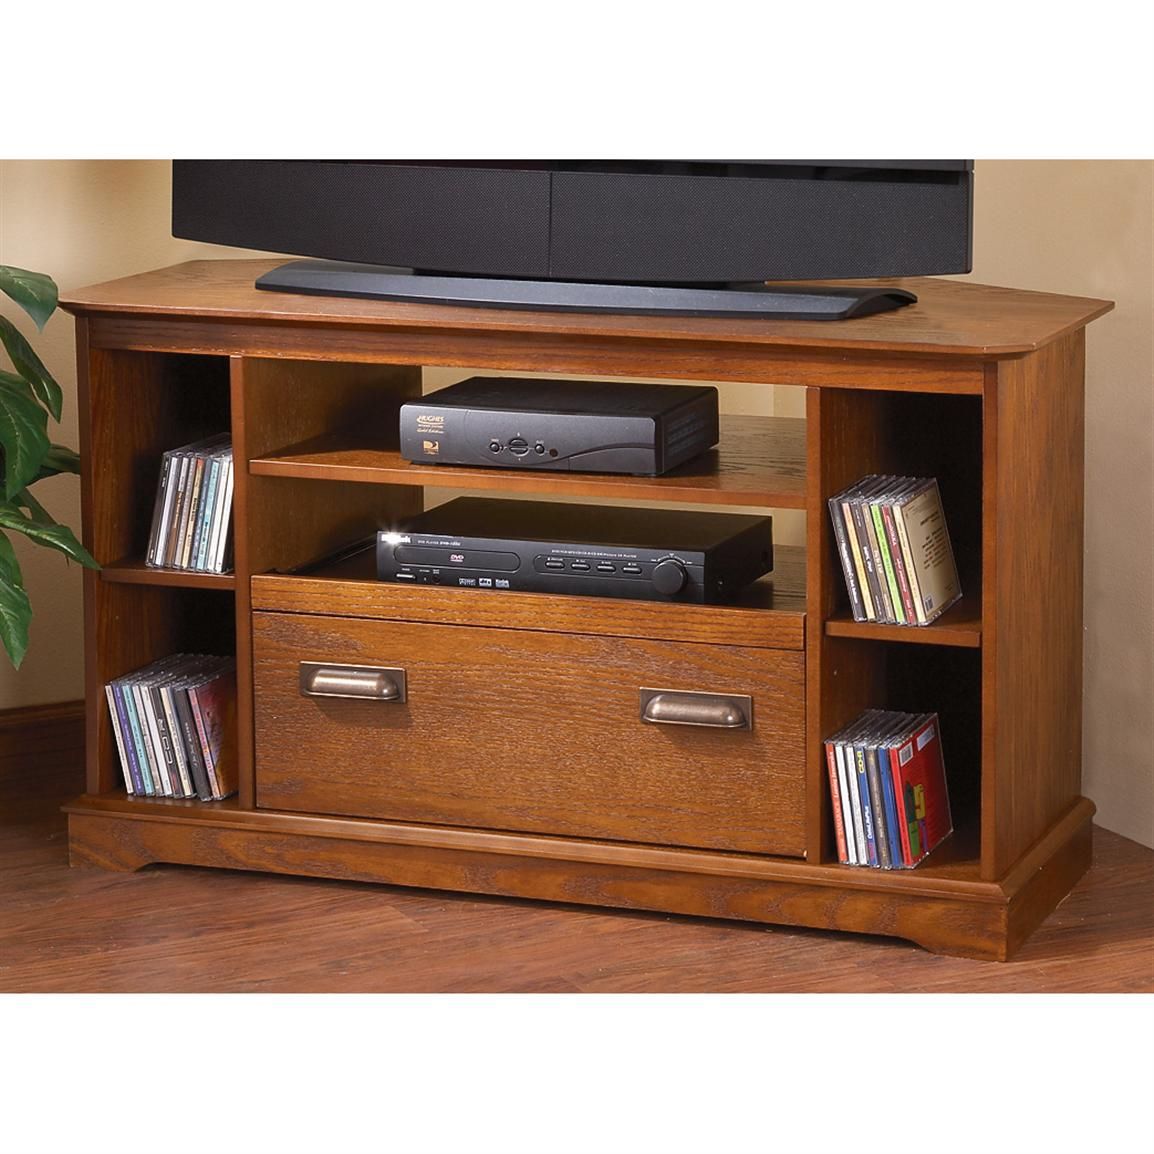 Antique Oak Corner Tv Cabinet – 154271, At Sportsman's Guide With Regard To Sideboard Tv Stands (View 9 of 15)